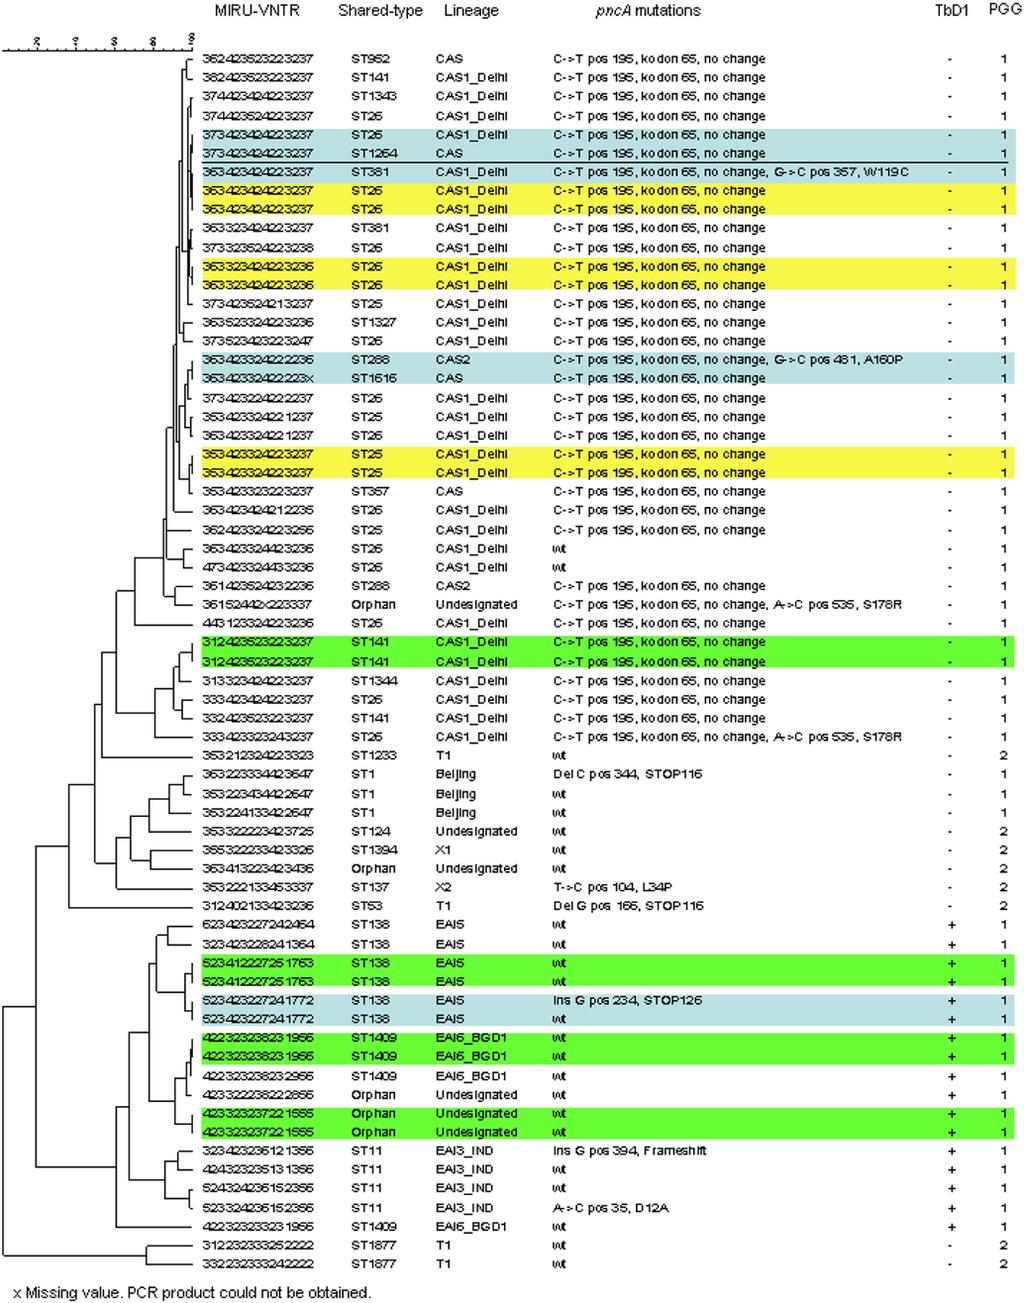 Figure 1. Diversity of 65 M. tuberculosis isolates from New Delhi, India deduced from MIRU-VNTR, spoligotyping and single nucleotide polymorphism analyses.